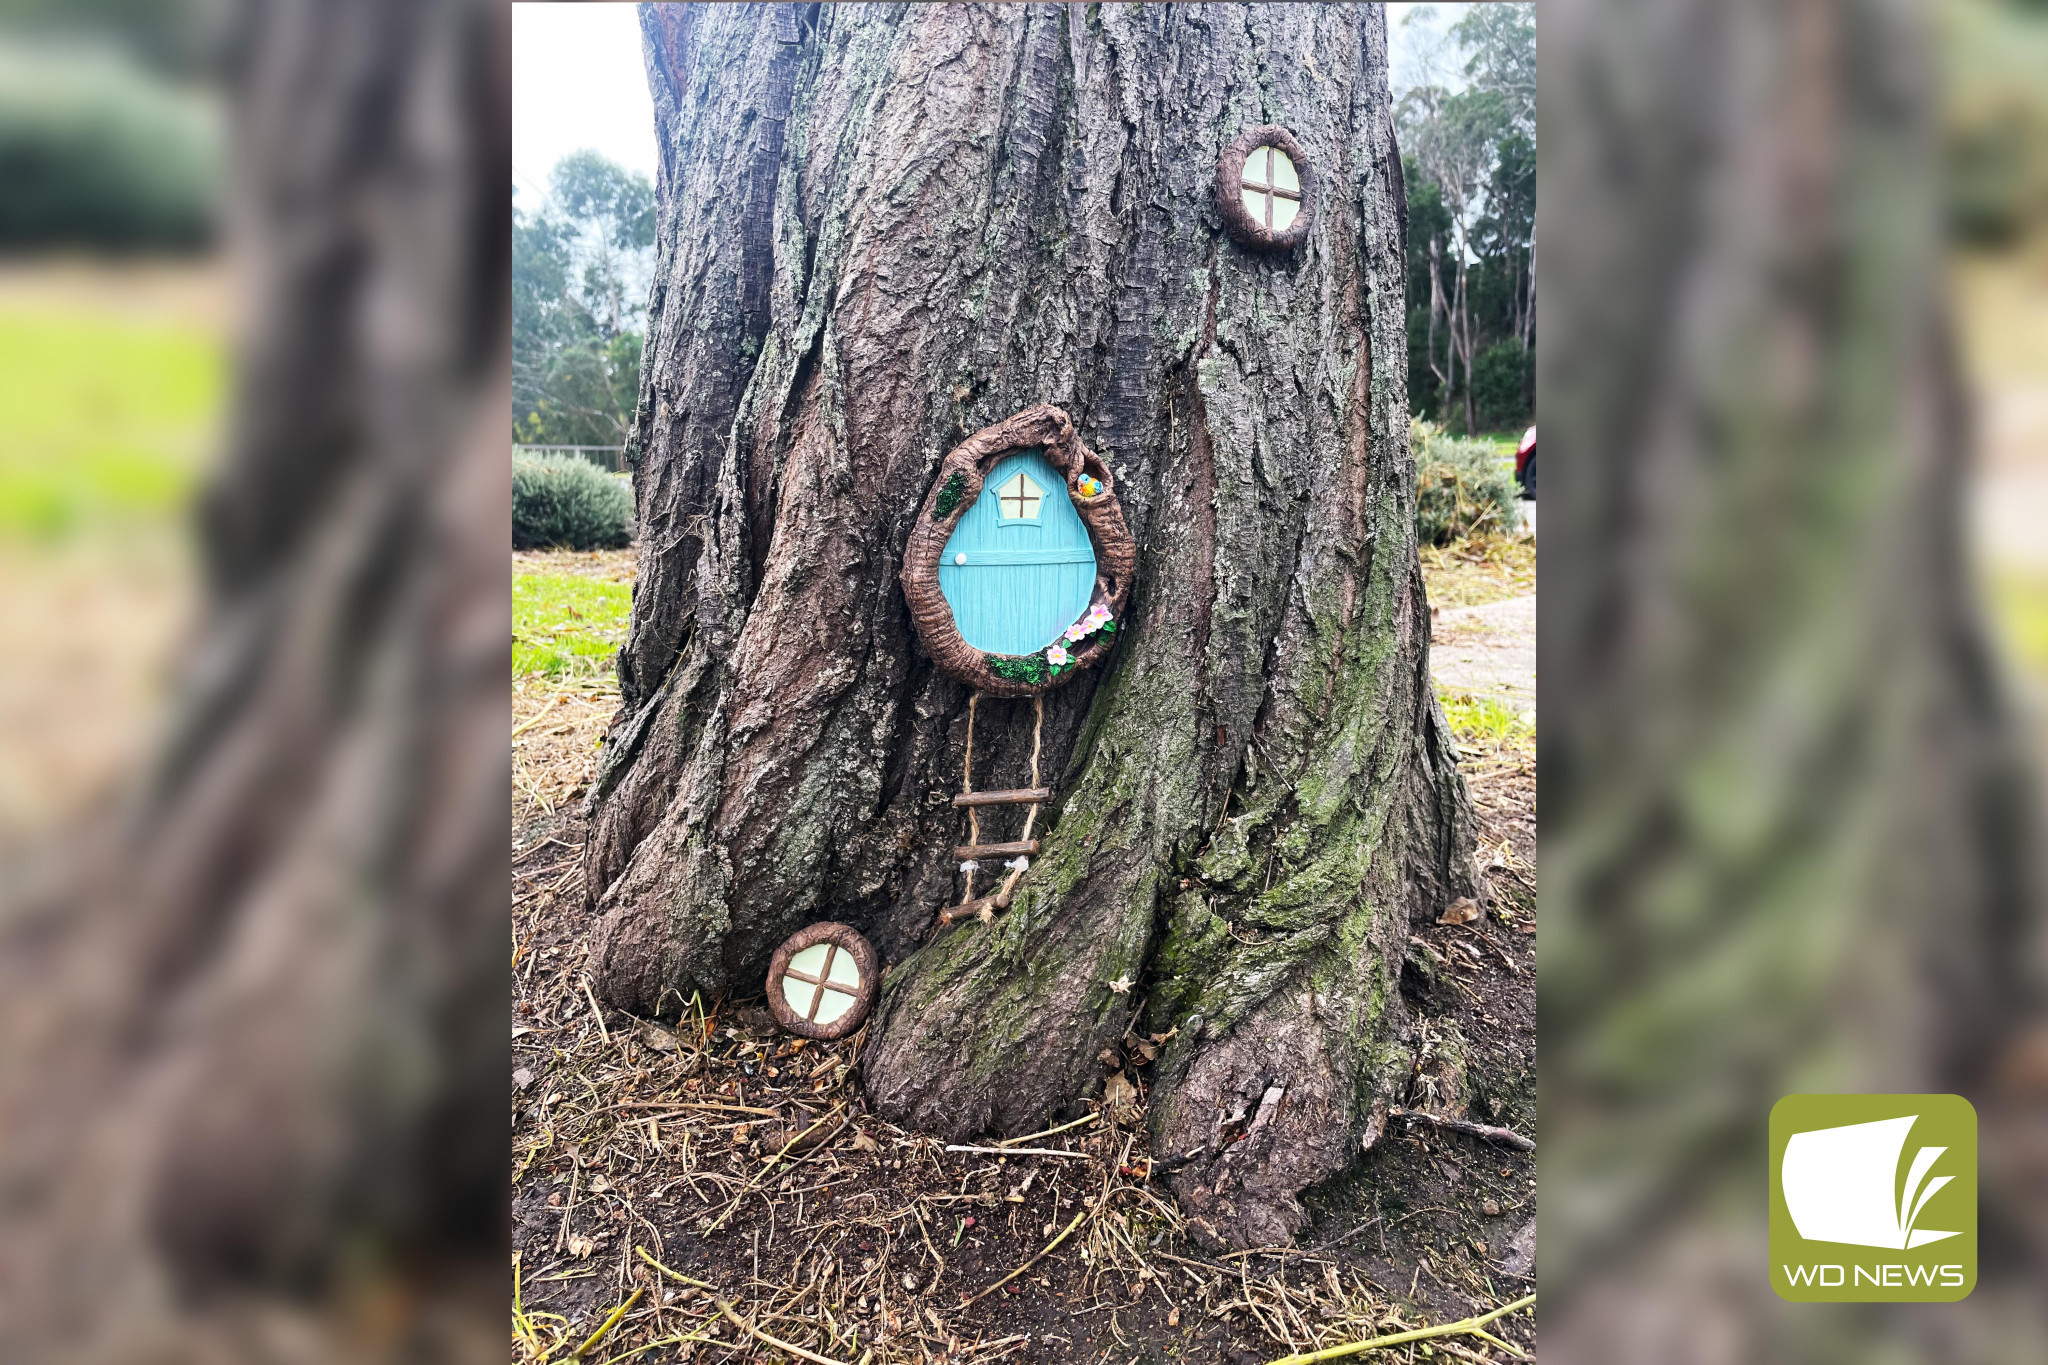 Timboon residents have been delighted with some magical new additions to the town last week. Have you spotted them yet?